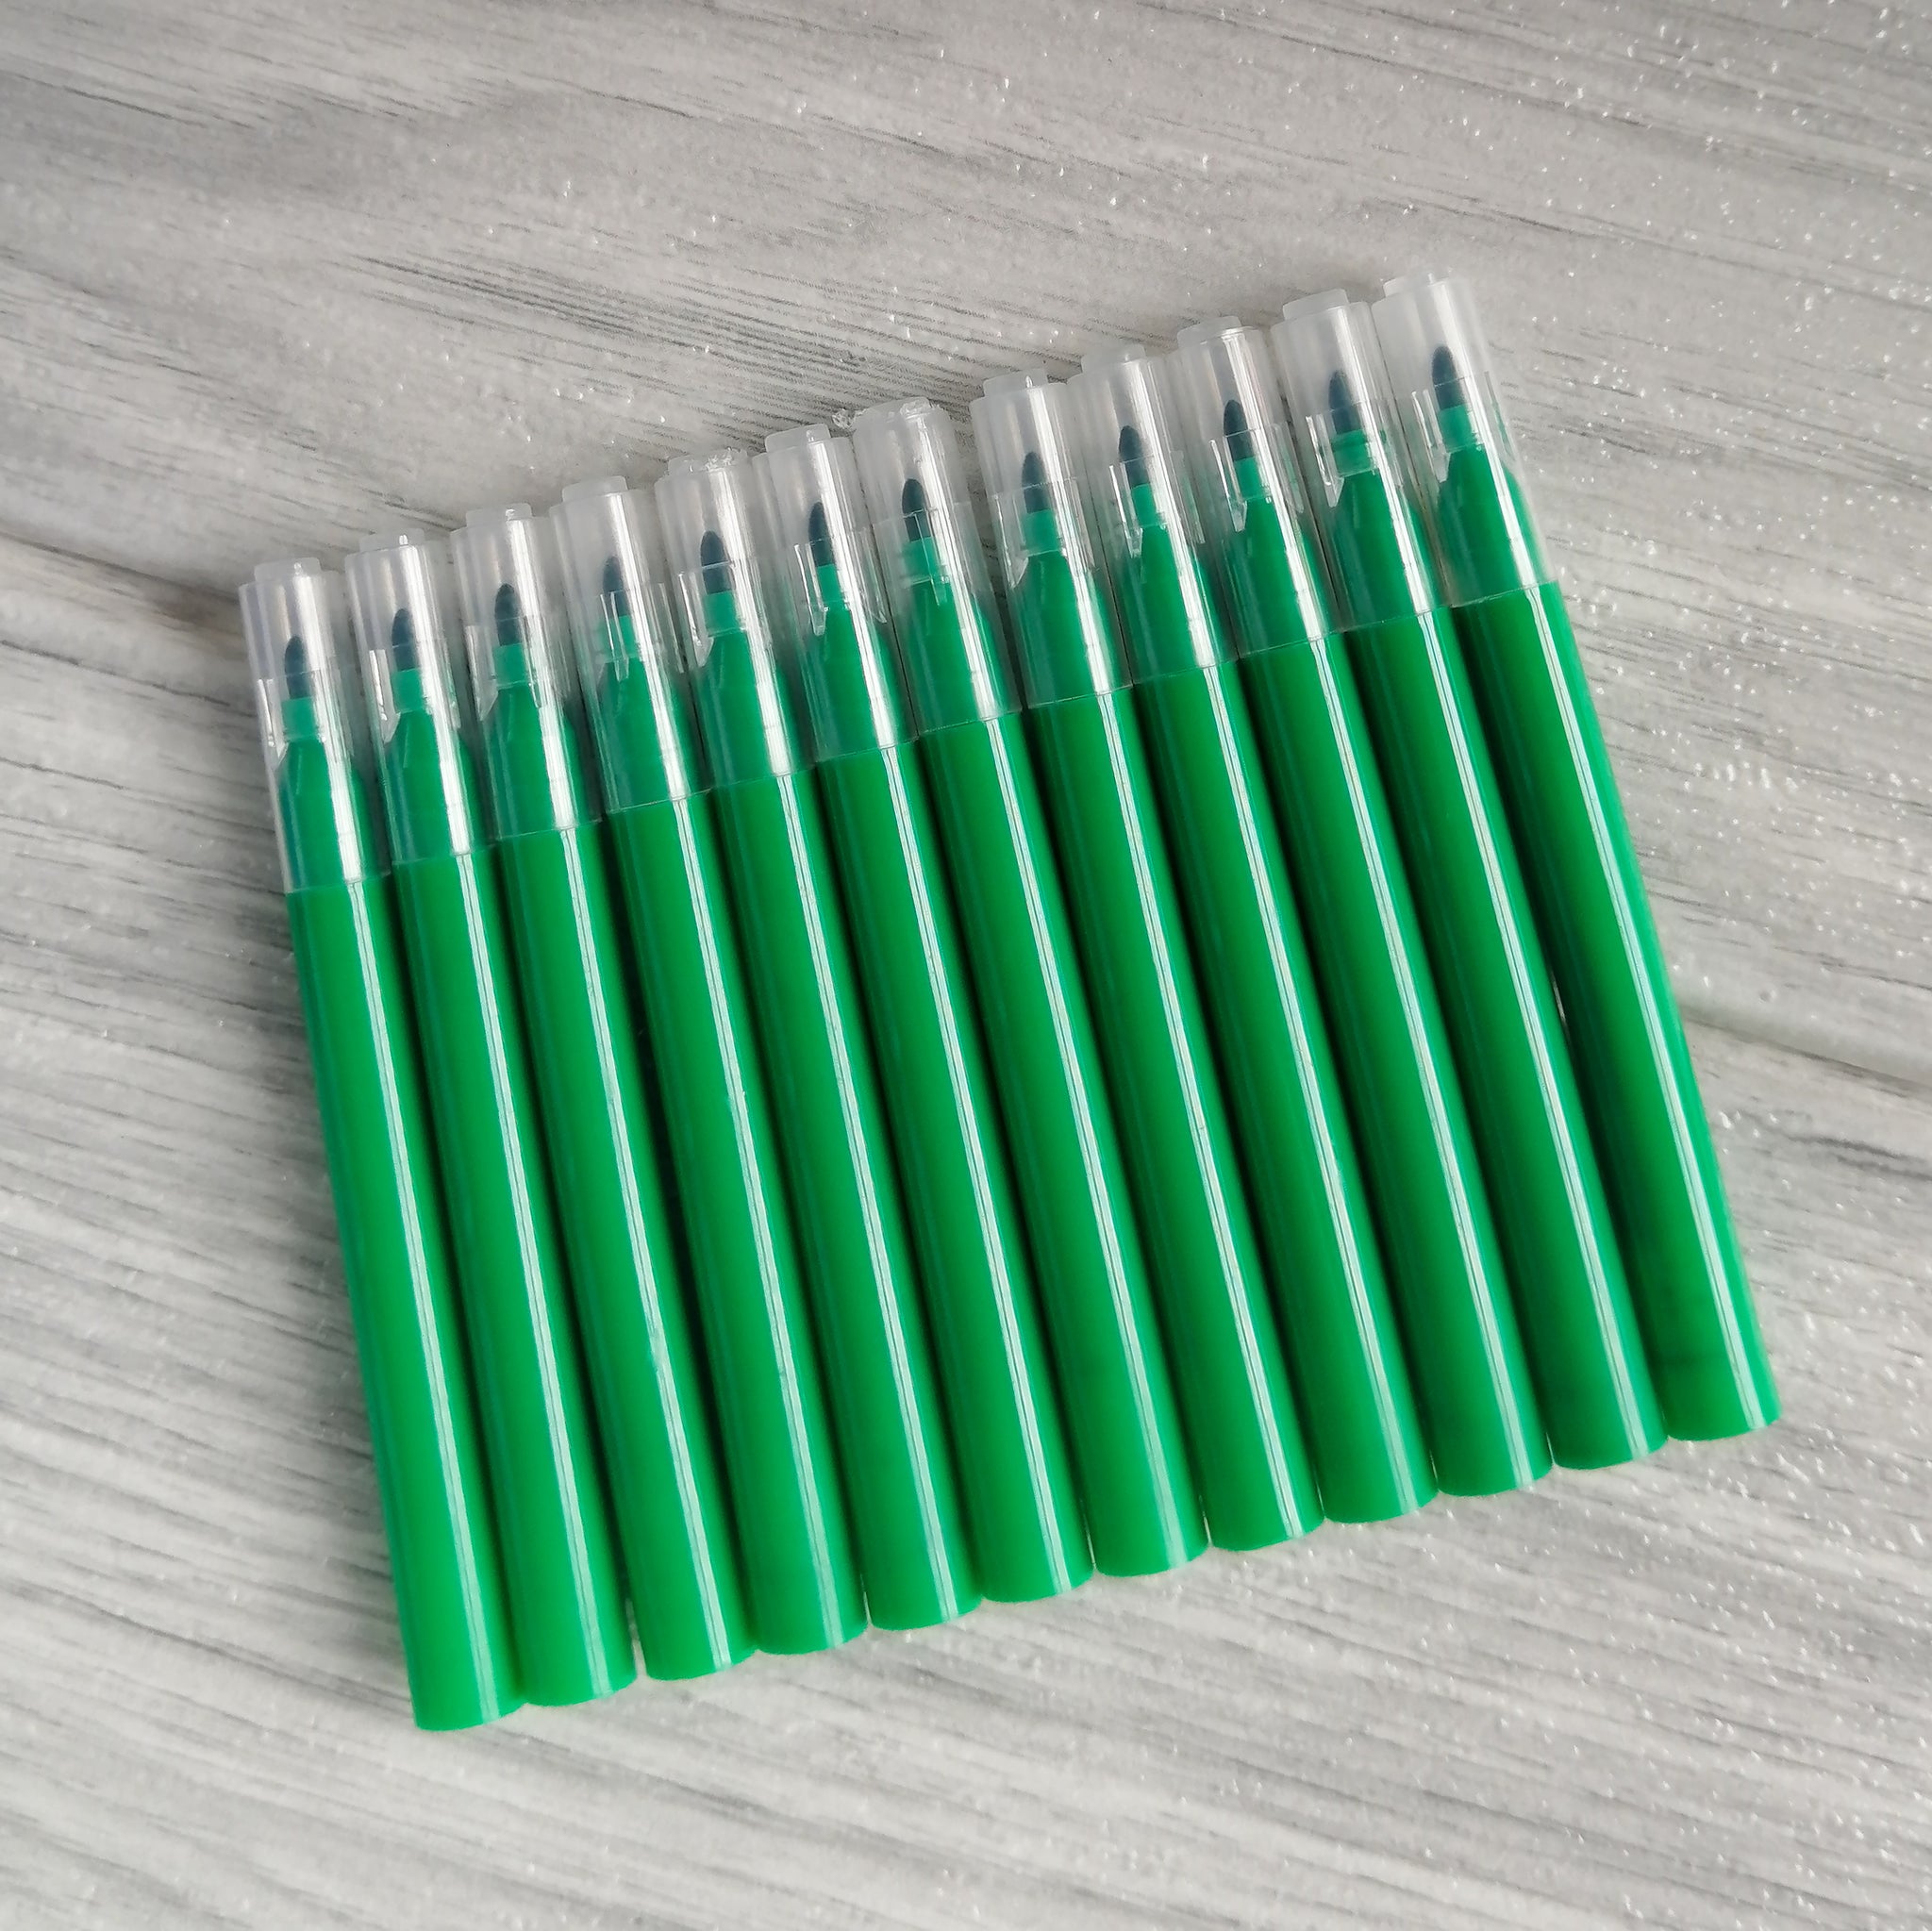 Mini Edible Markers - GREEN PACK OF 12